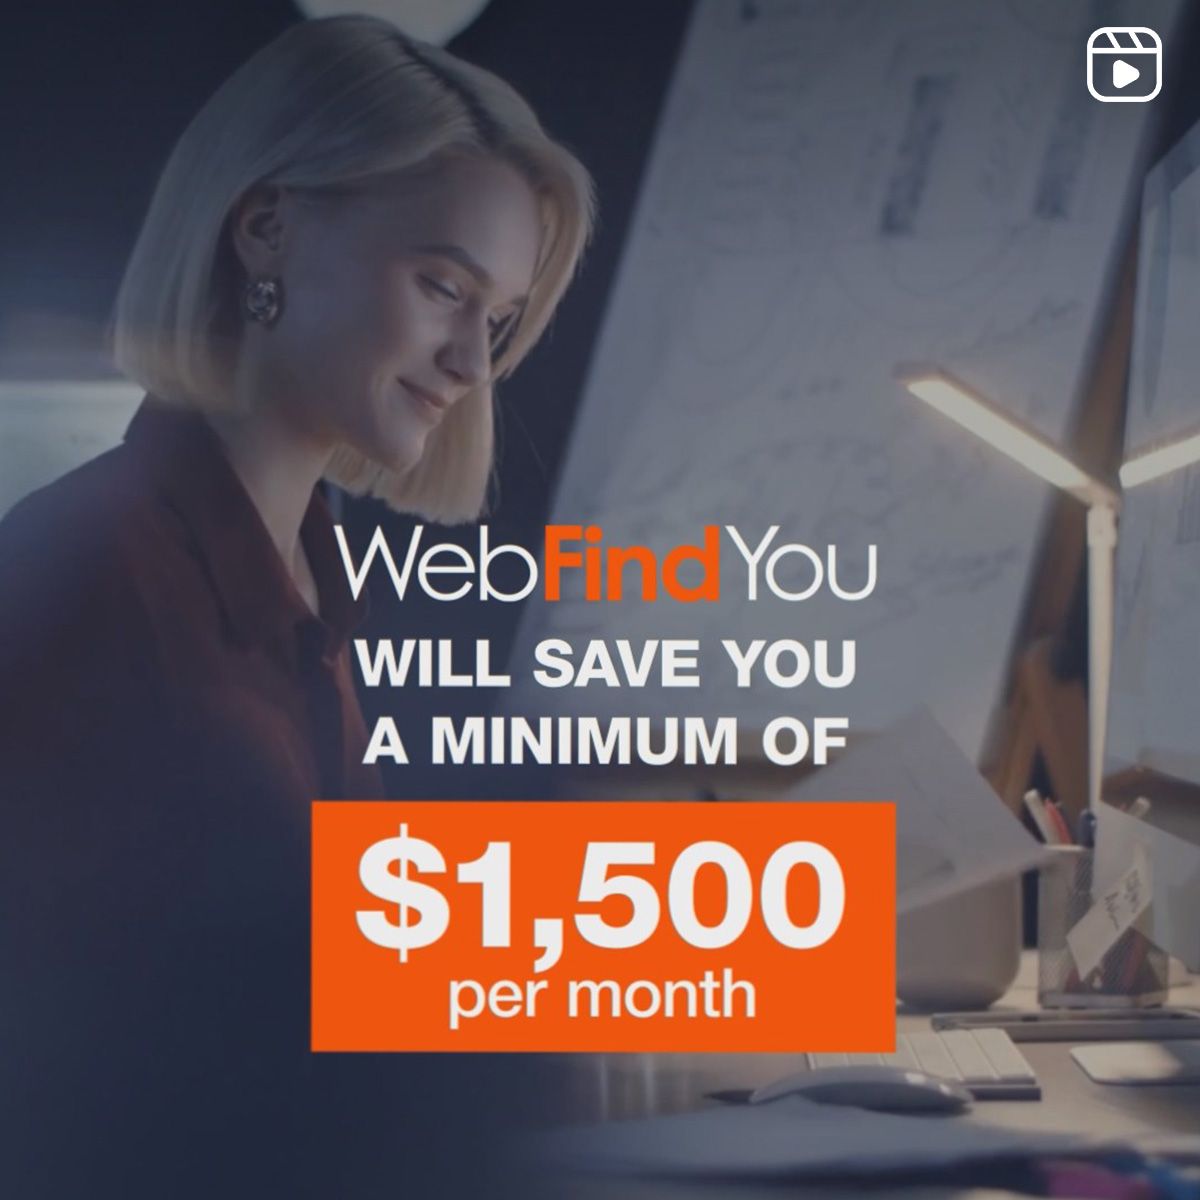 WebFindYou will save you a minimum of $1,500